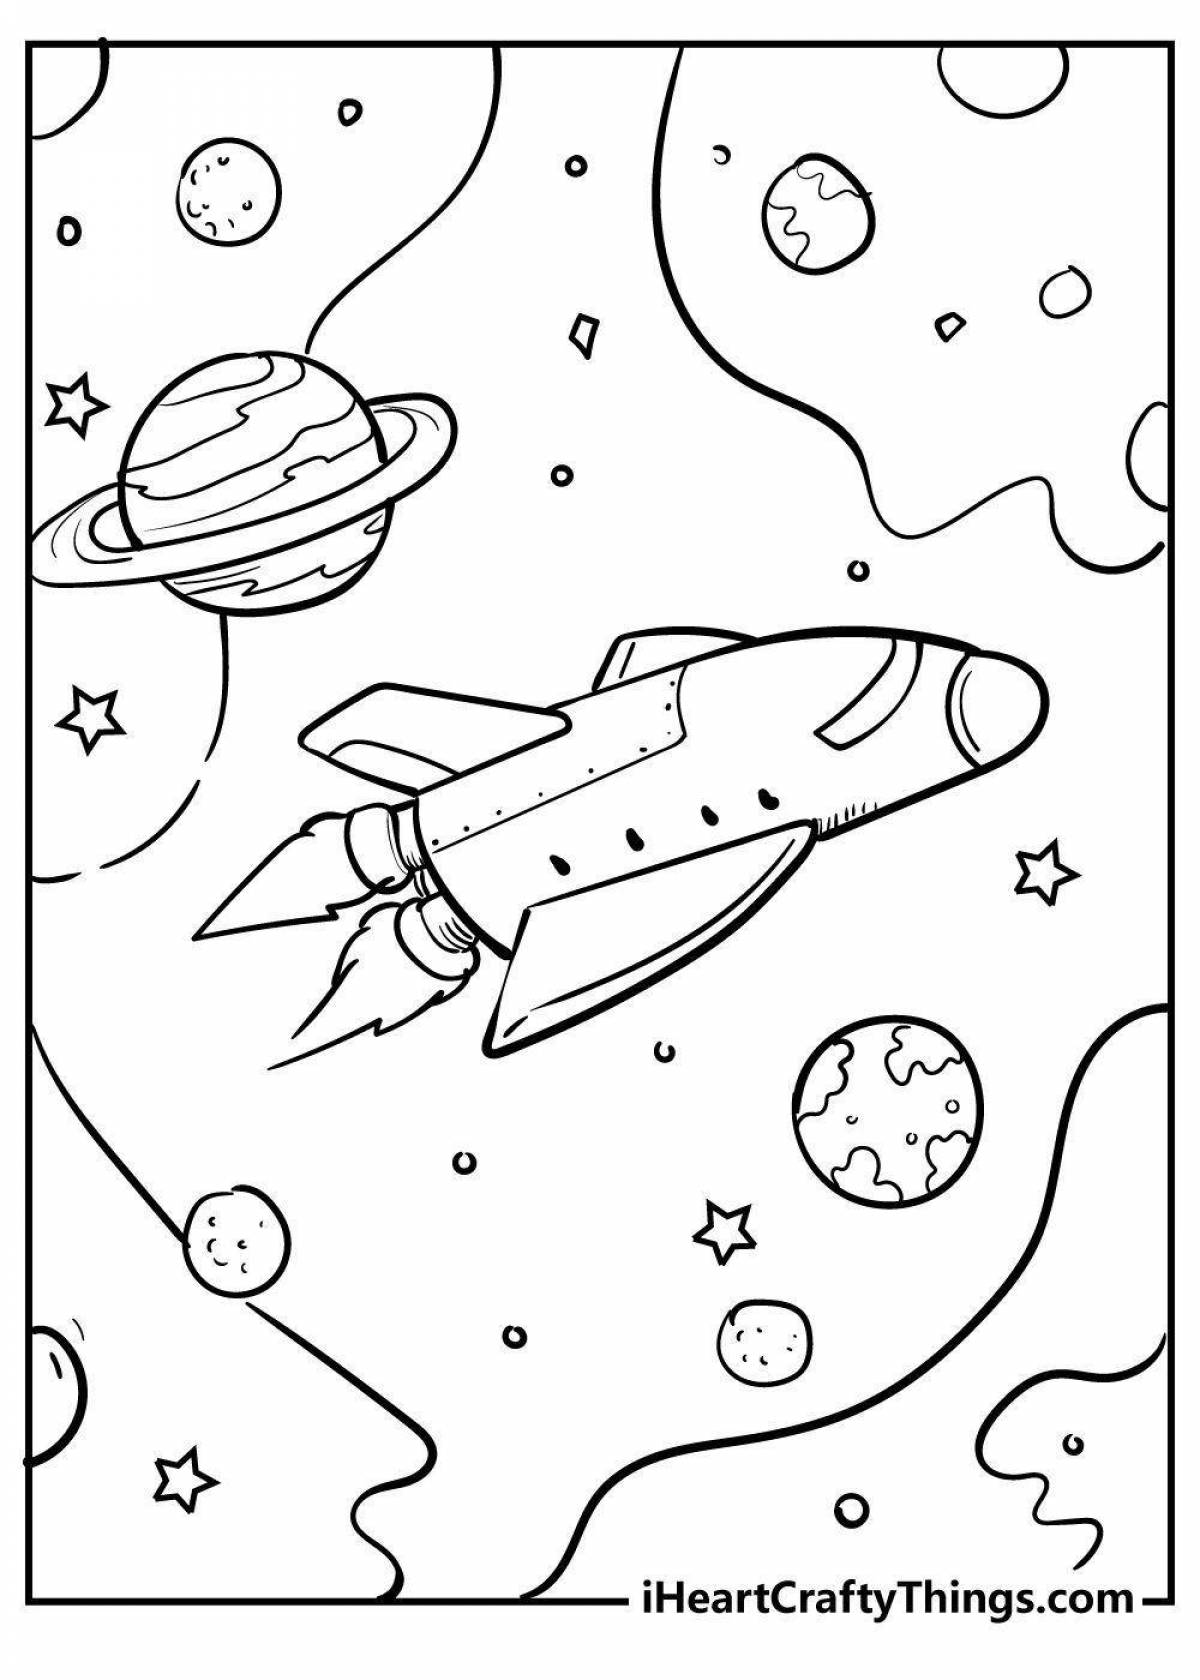 Tempting space by numbers coloring book